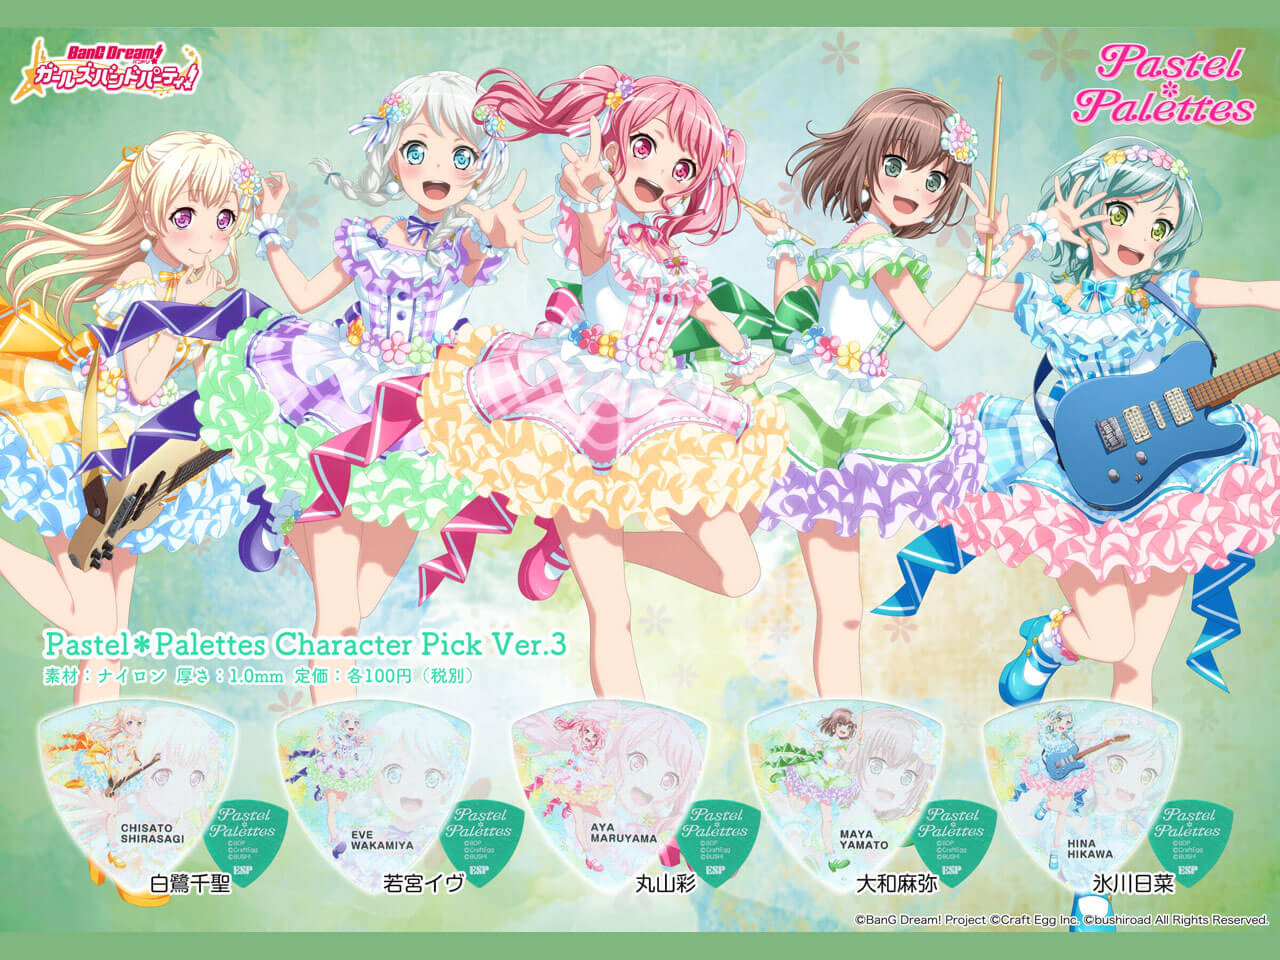 【ESP×BanG Dream!コラボピック】Pastel*Palettes Character Pick Ver.3 "若宮イヴ"10枚セット（GBP EVE PASTEL PALETTES 3）